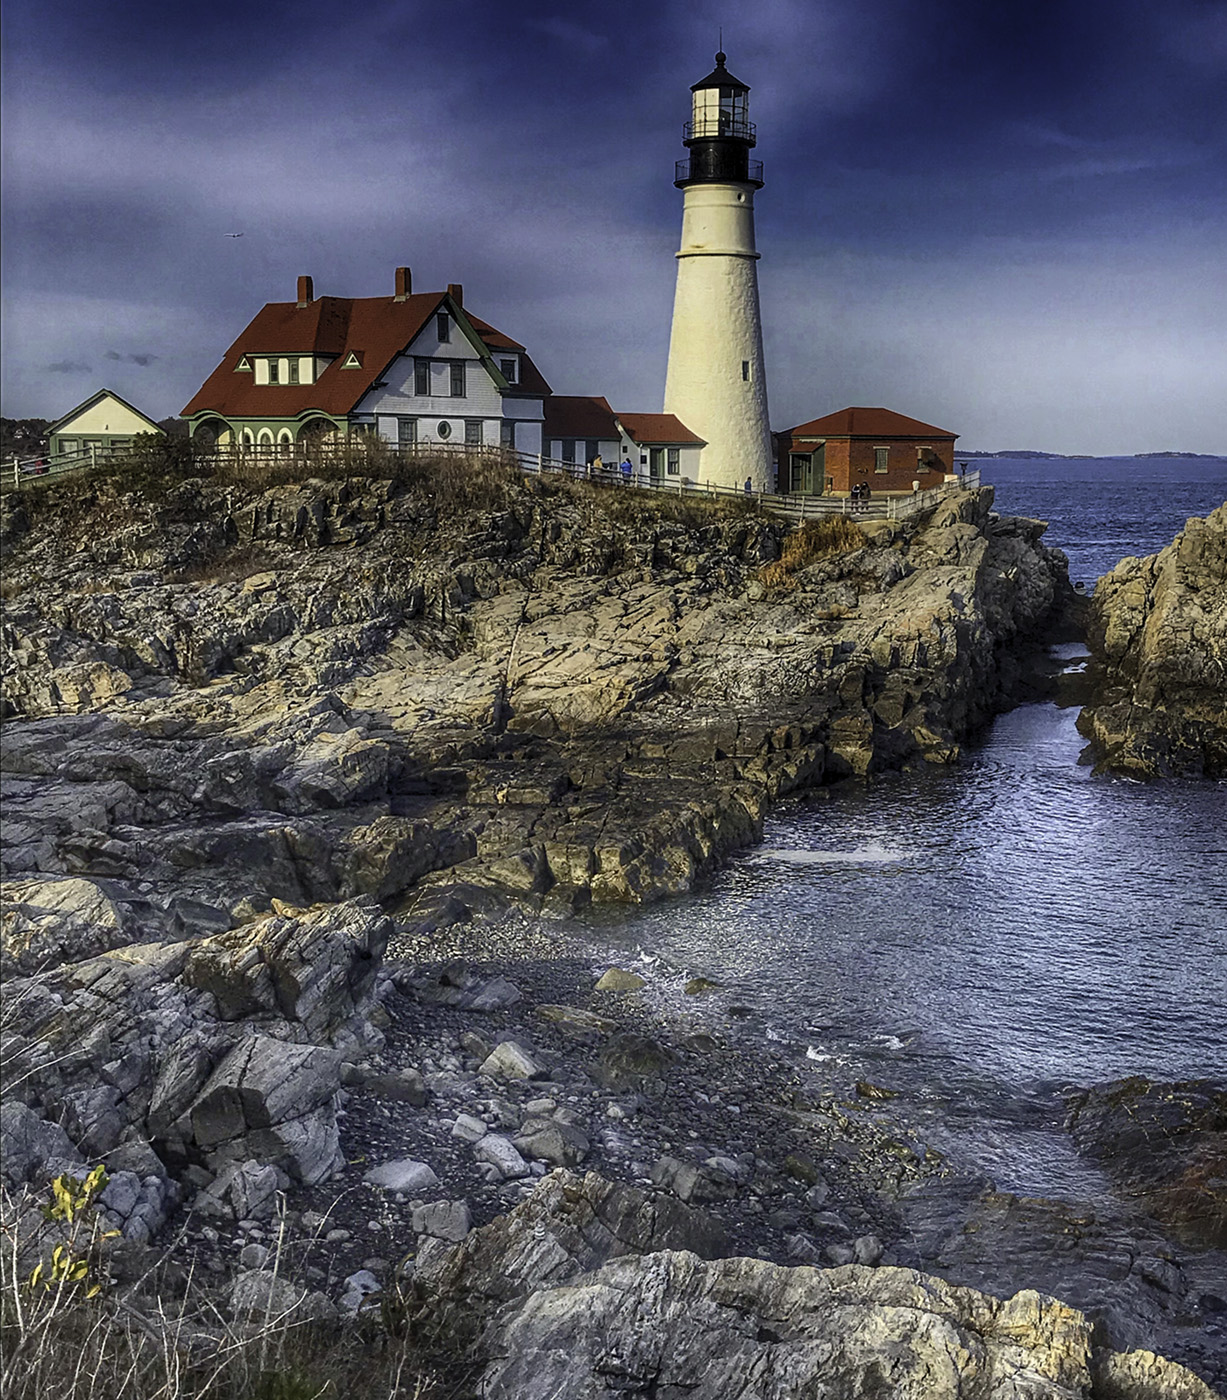 3rd PrizeOpen Color In Class 3 By Kimberly Scott For Portland Head Light Maine OCT-2021.jpg